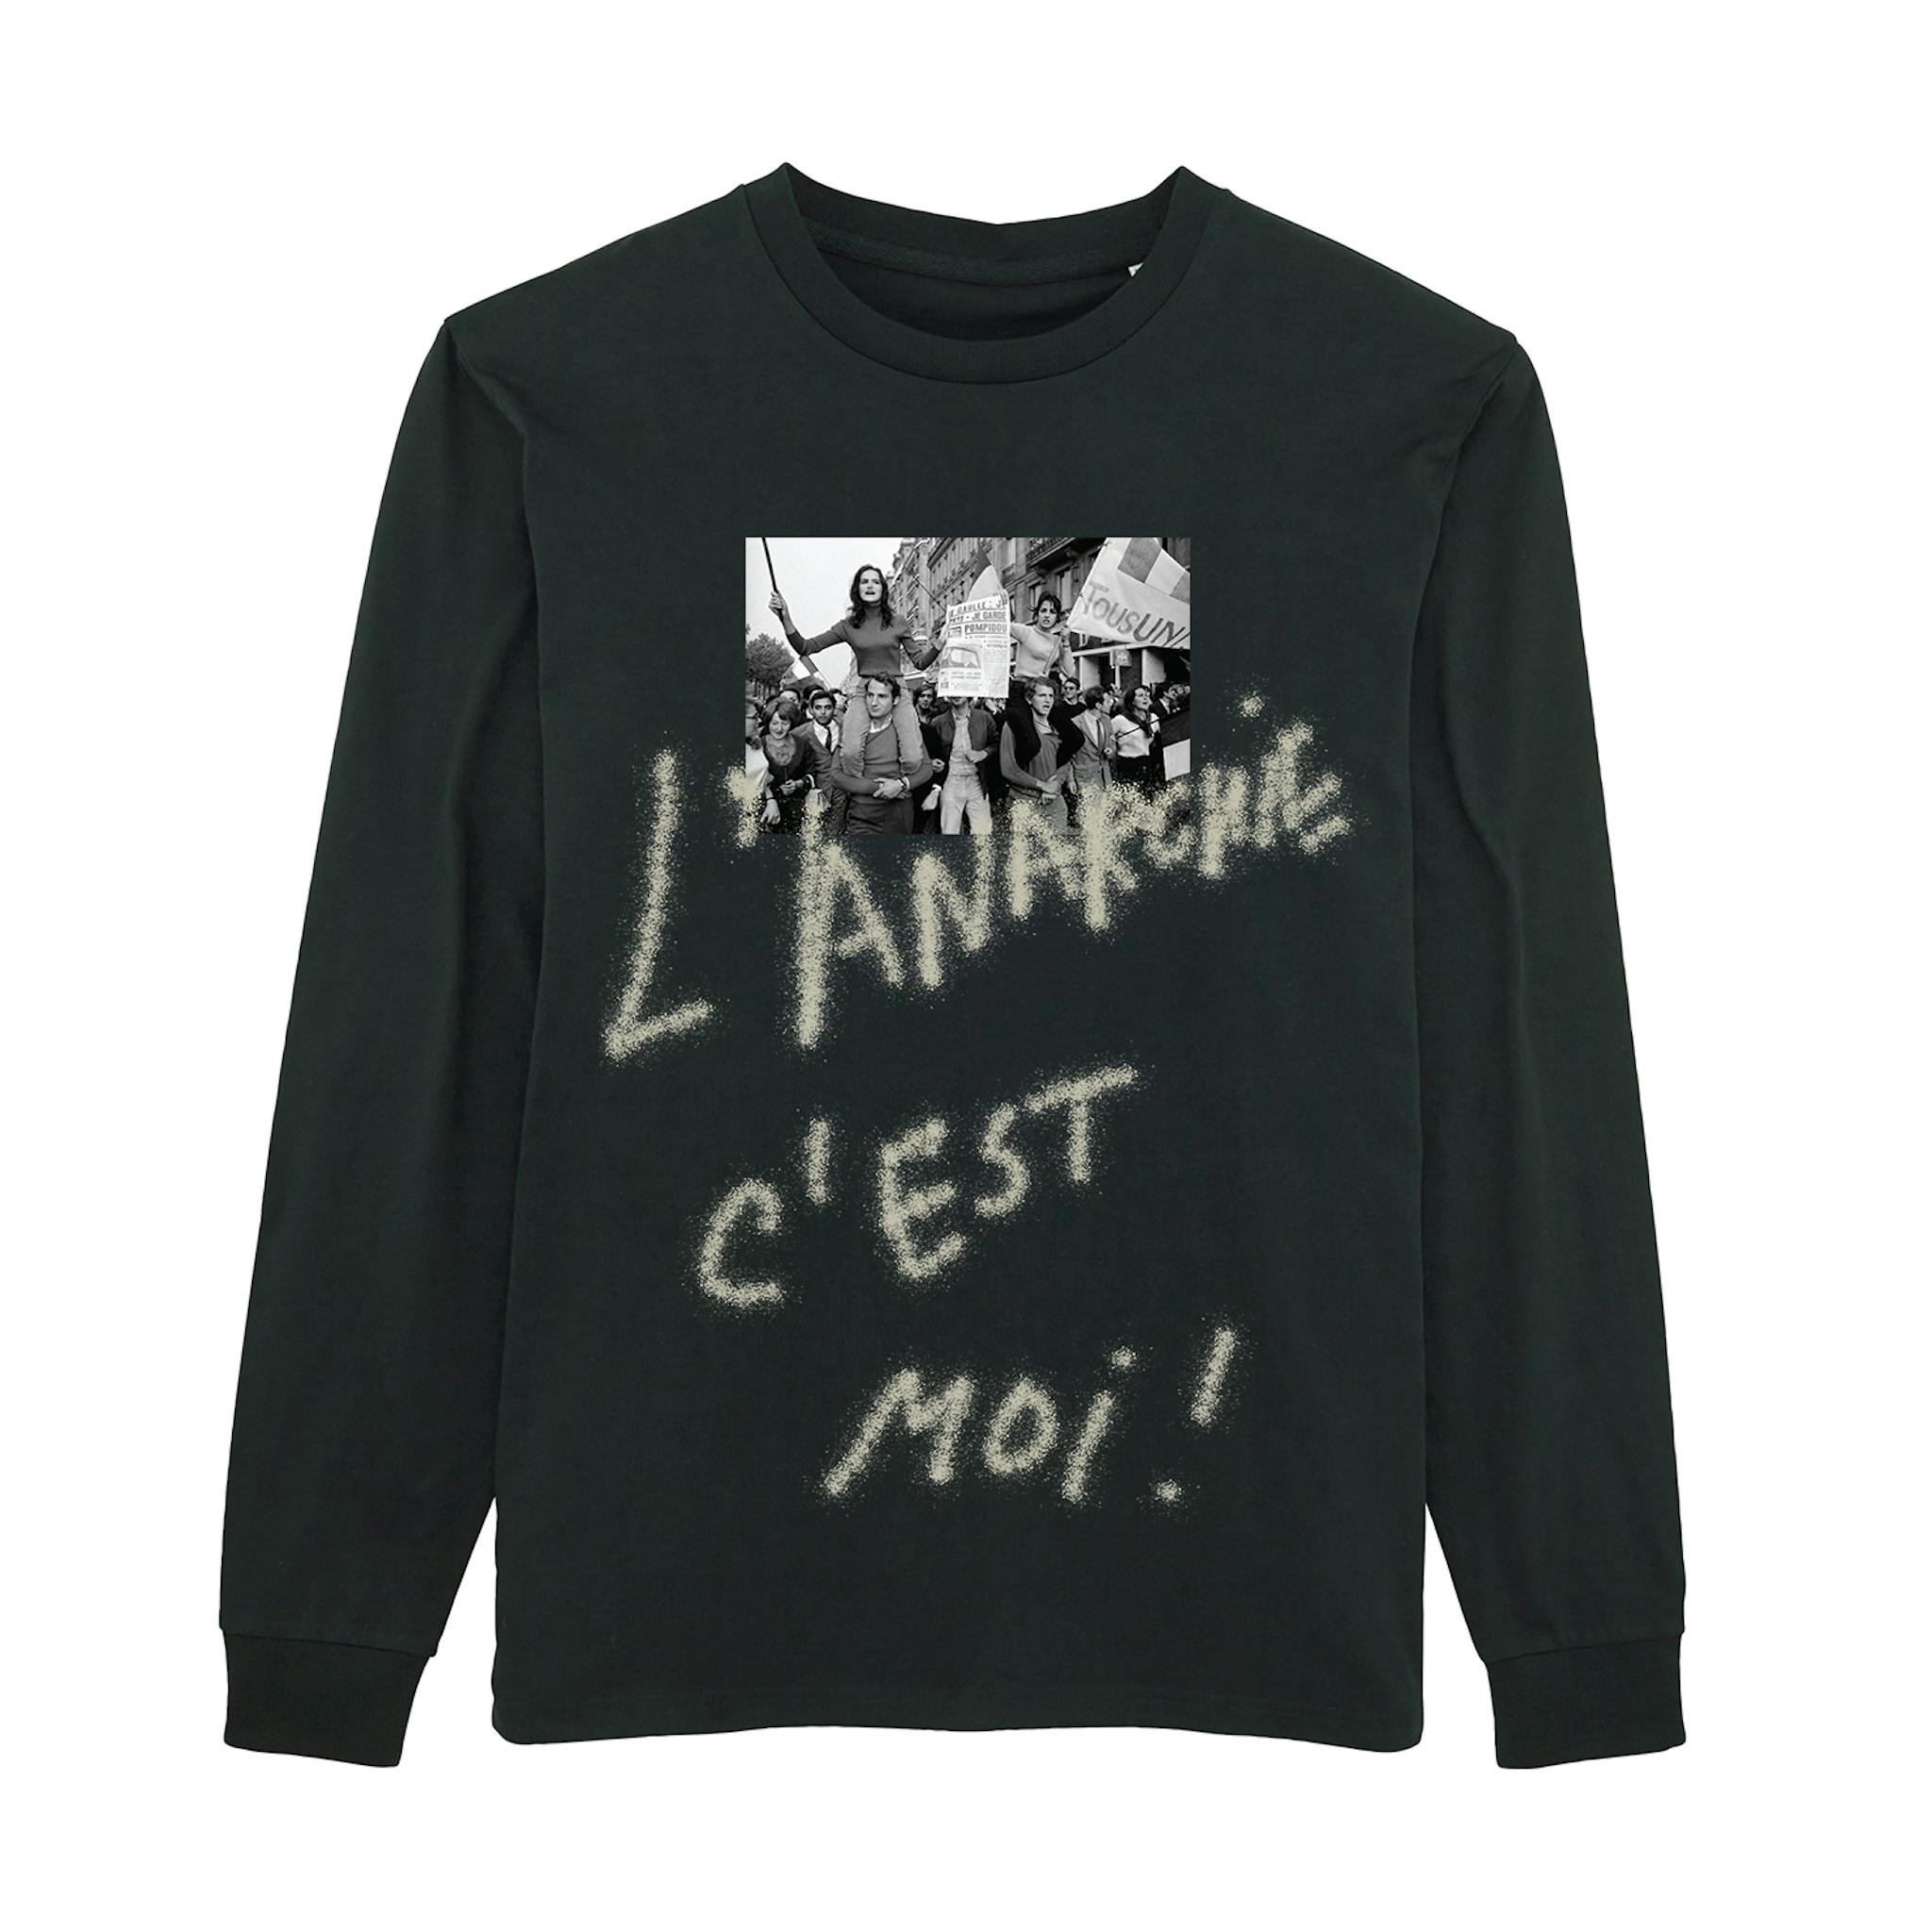 A dark long-sleeve T-shirt featuring a central photograph with protesters, above which is written in large, chalk-style lettering "L'ANARCHIE C'EST MOI!"